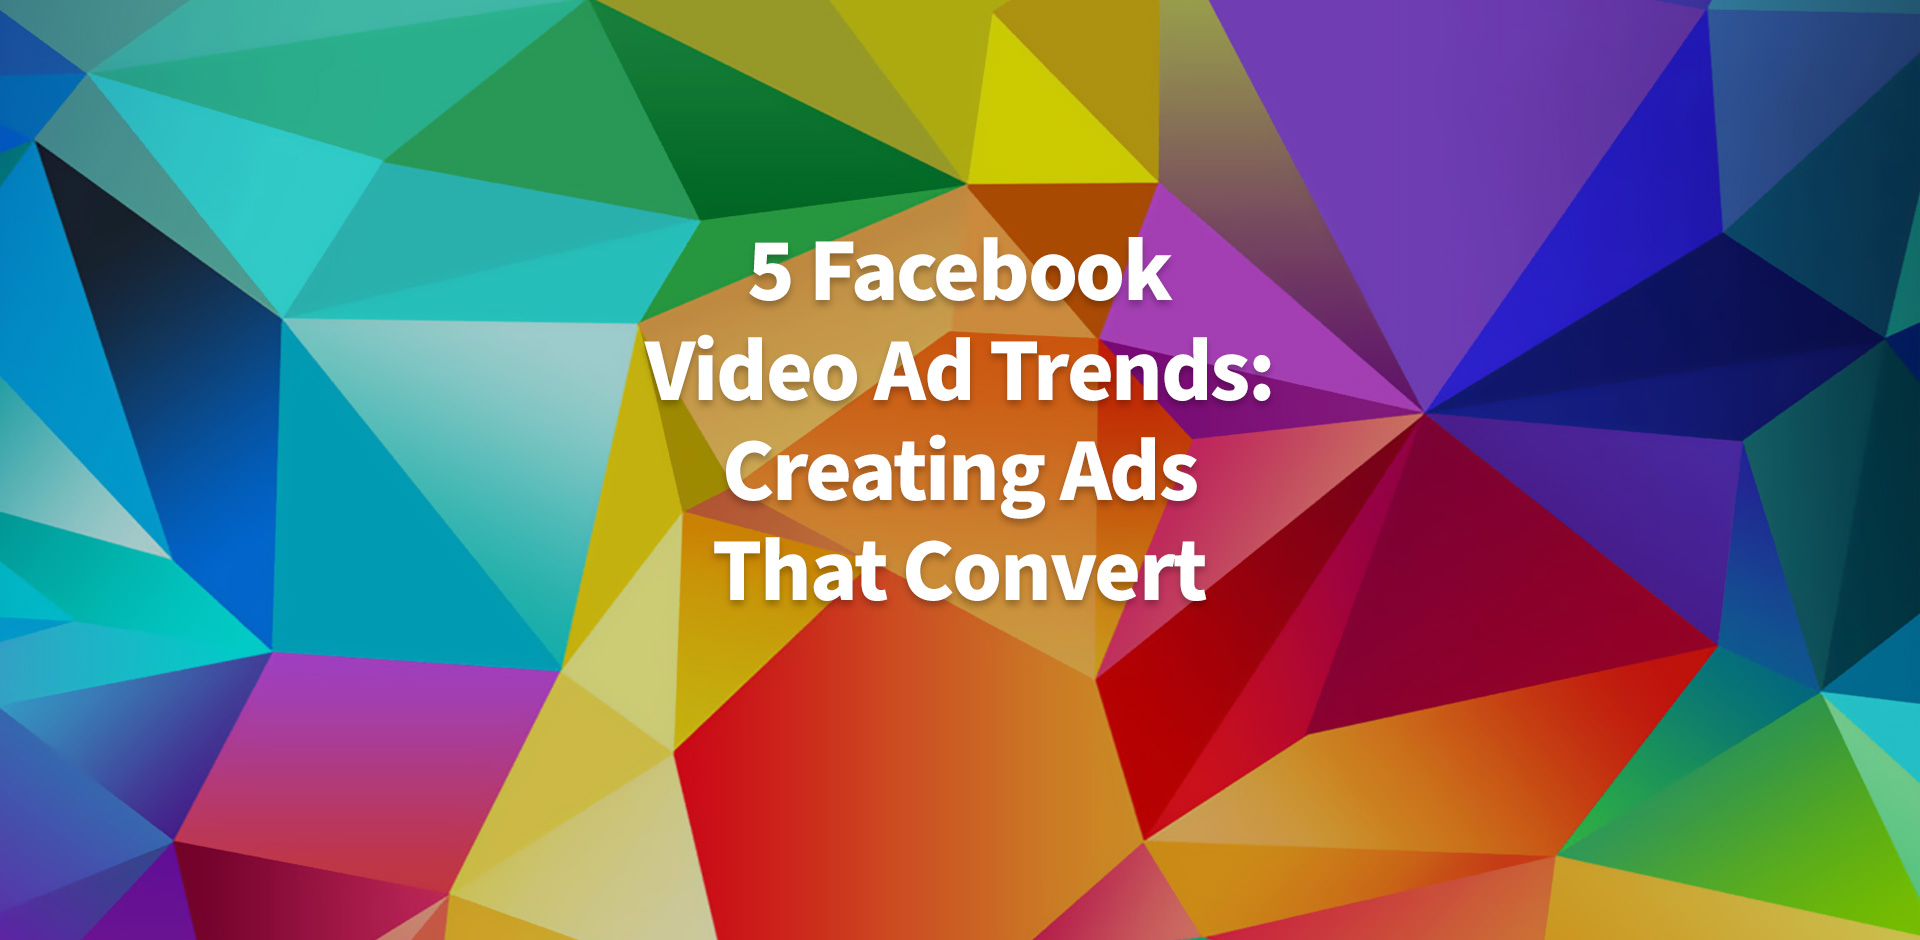 Facebook Video Ad Trends: Creating Ads That Convert